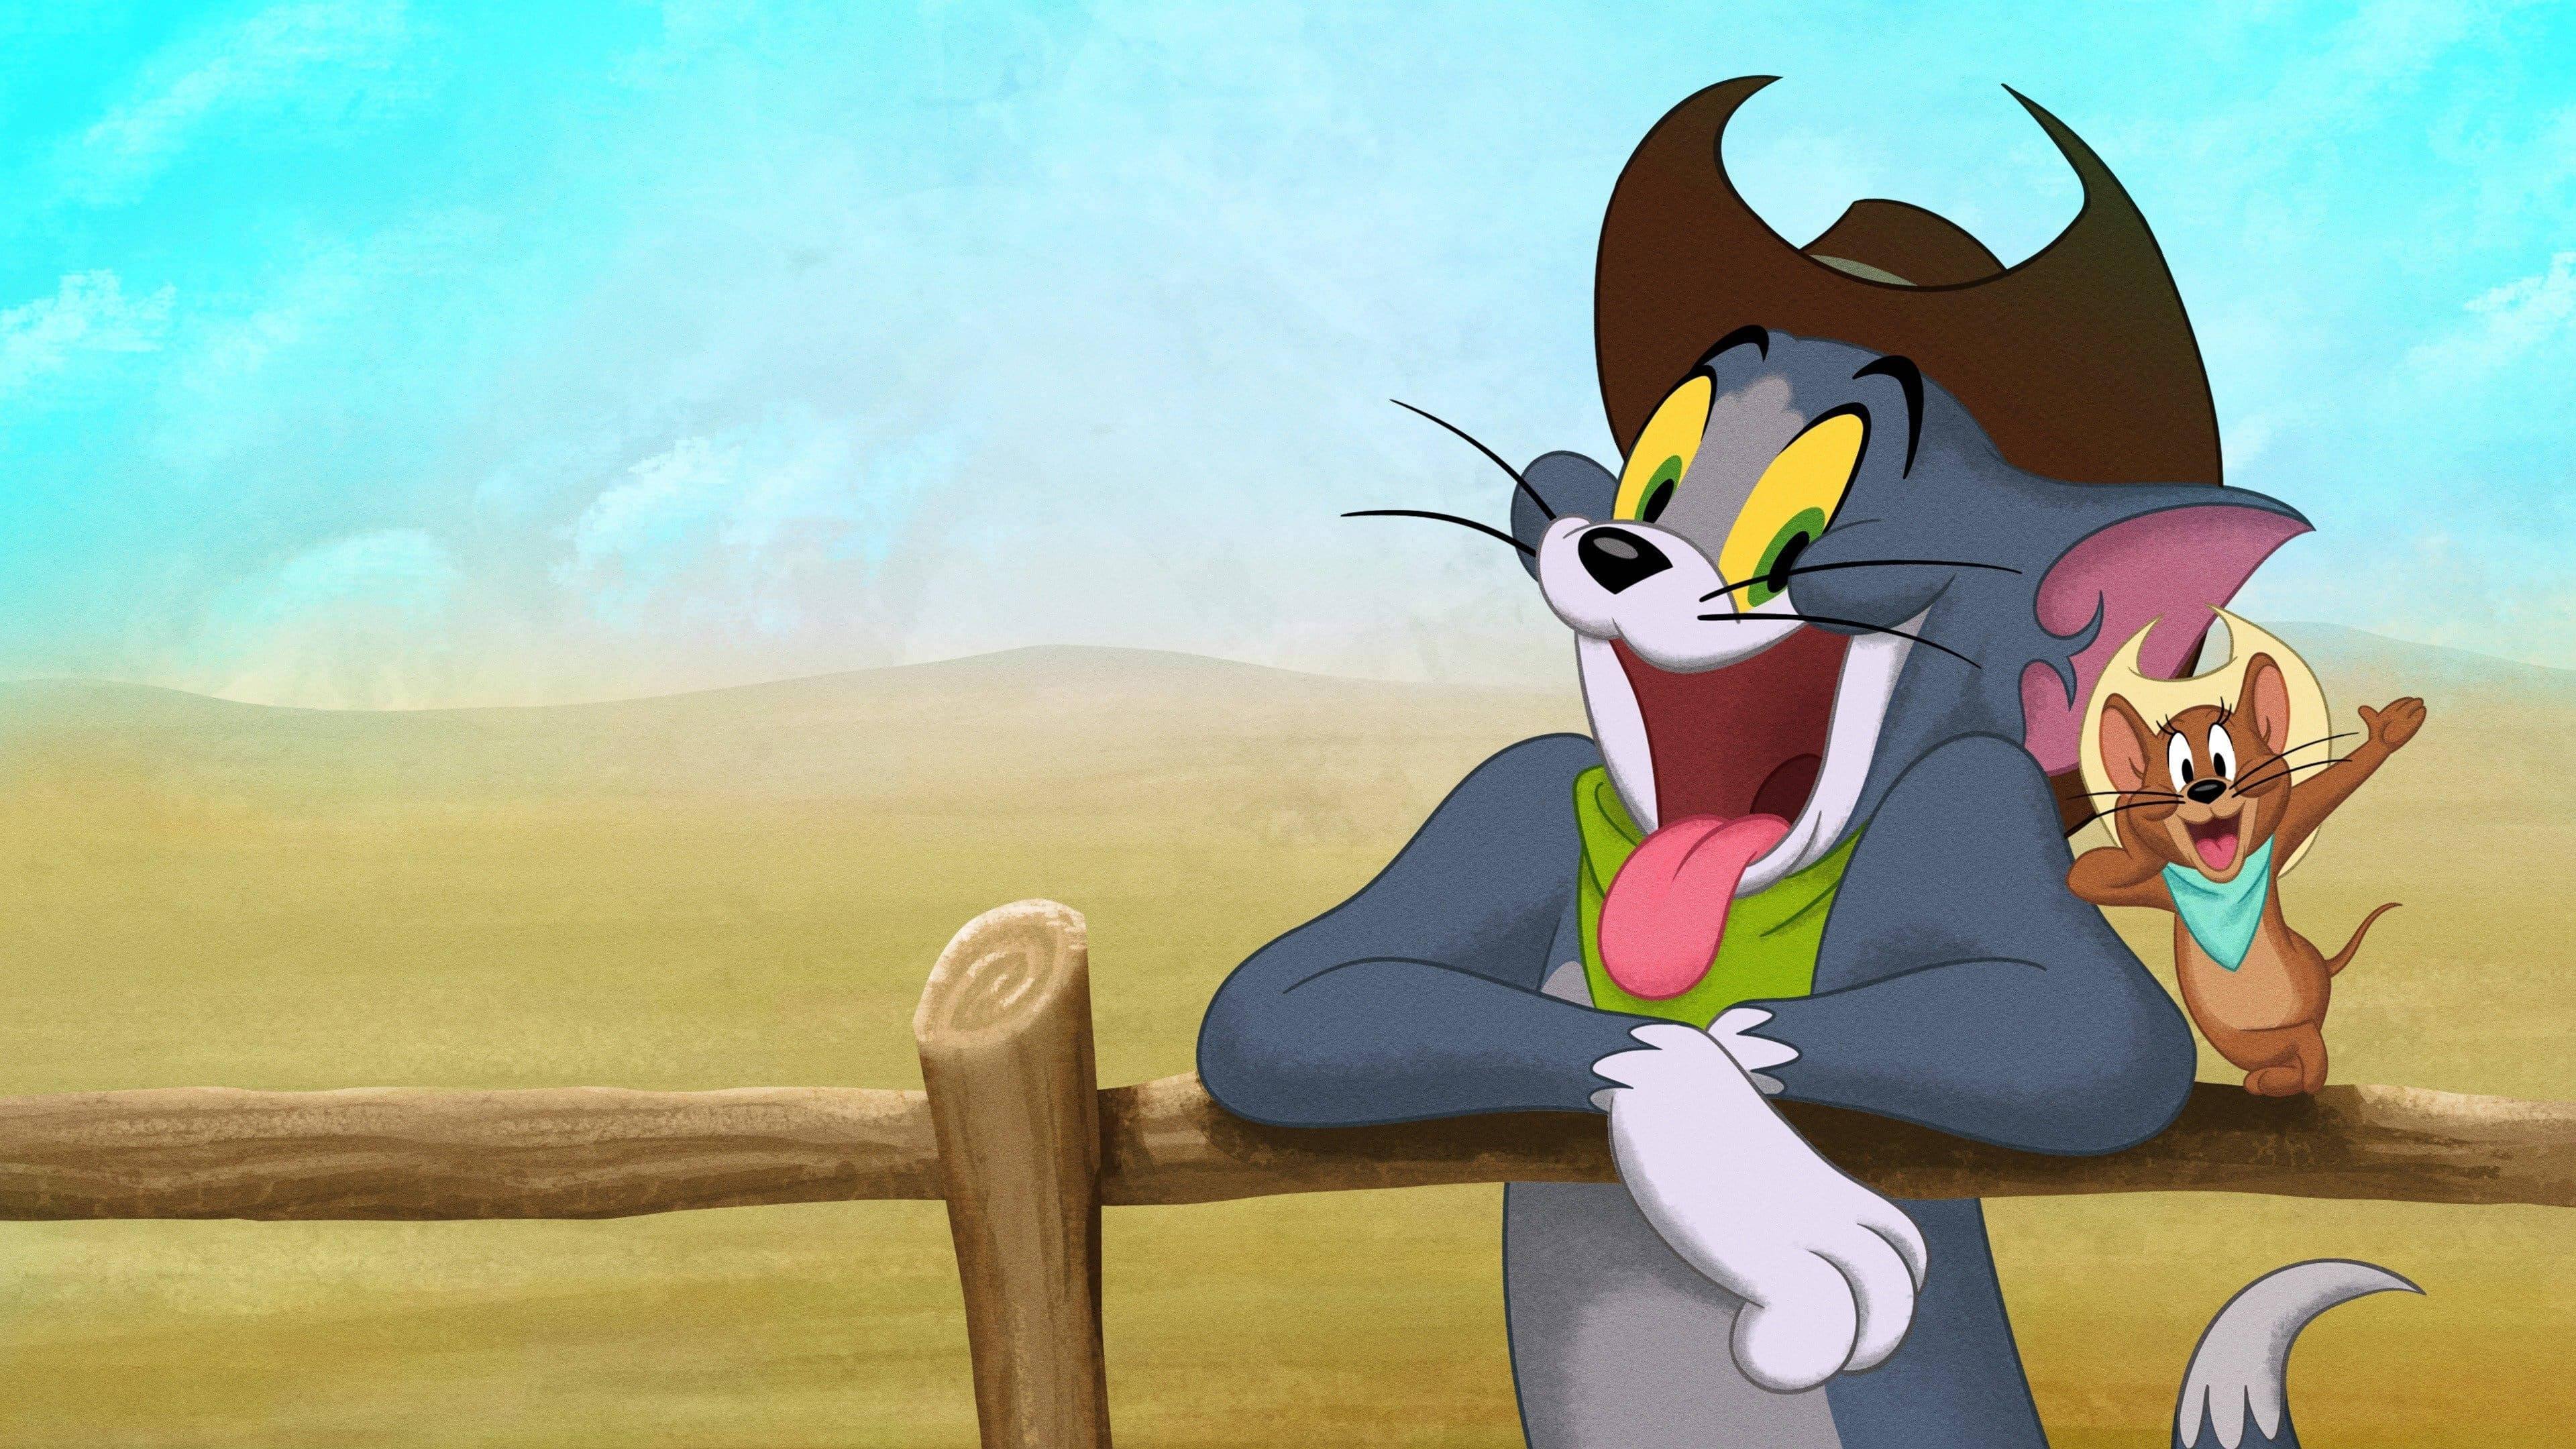 Tom and jerry cartoon wallpaper - Tom and Jerry